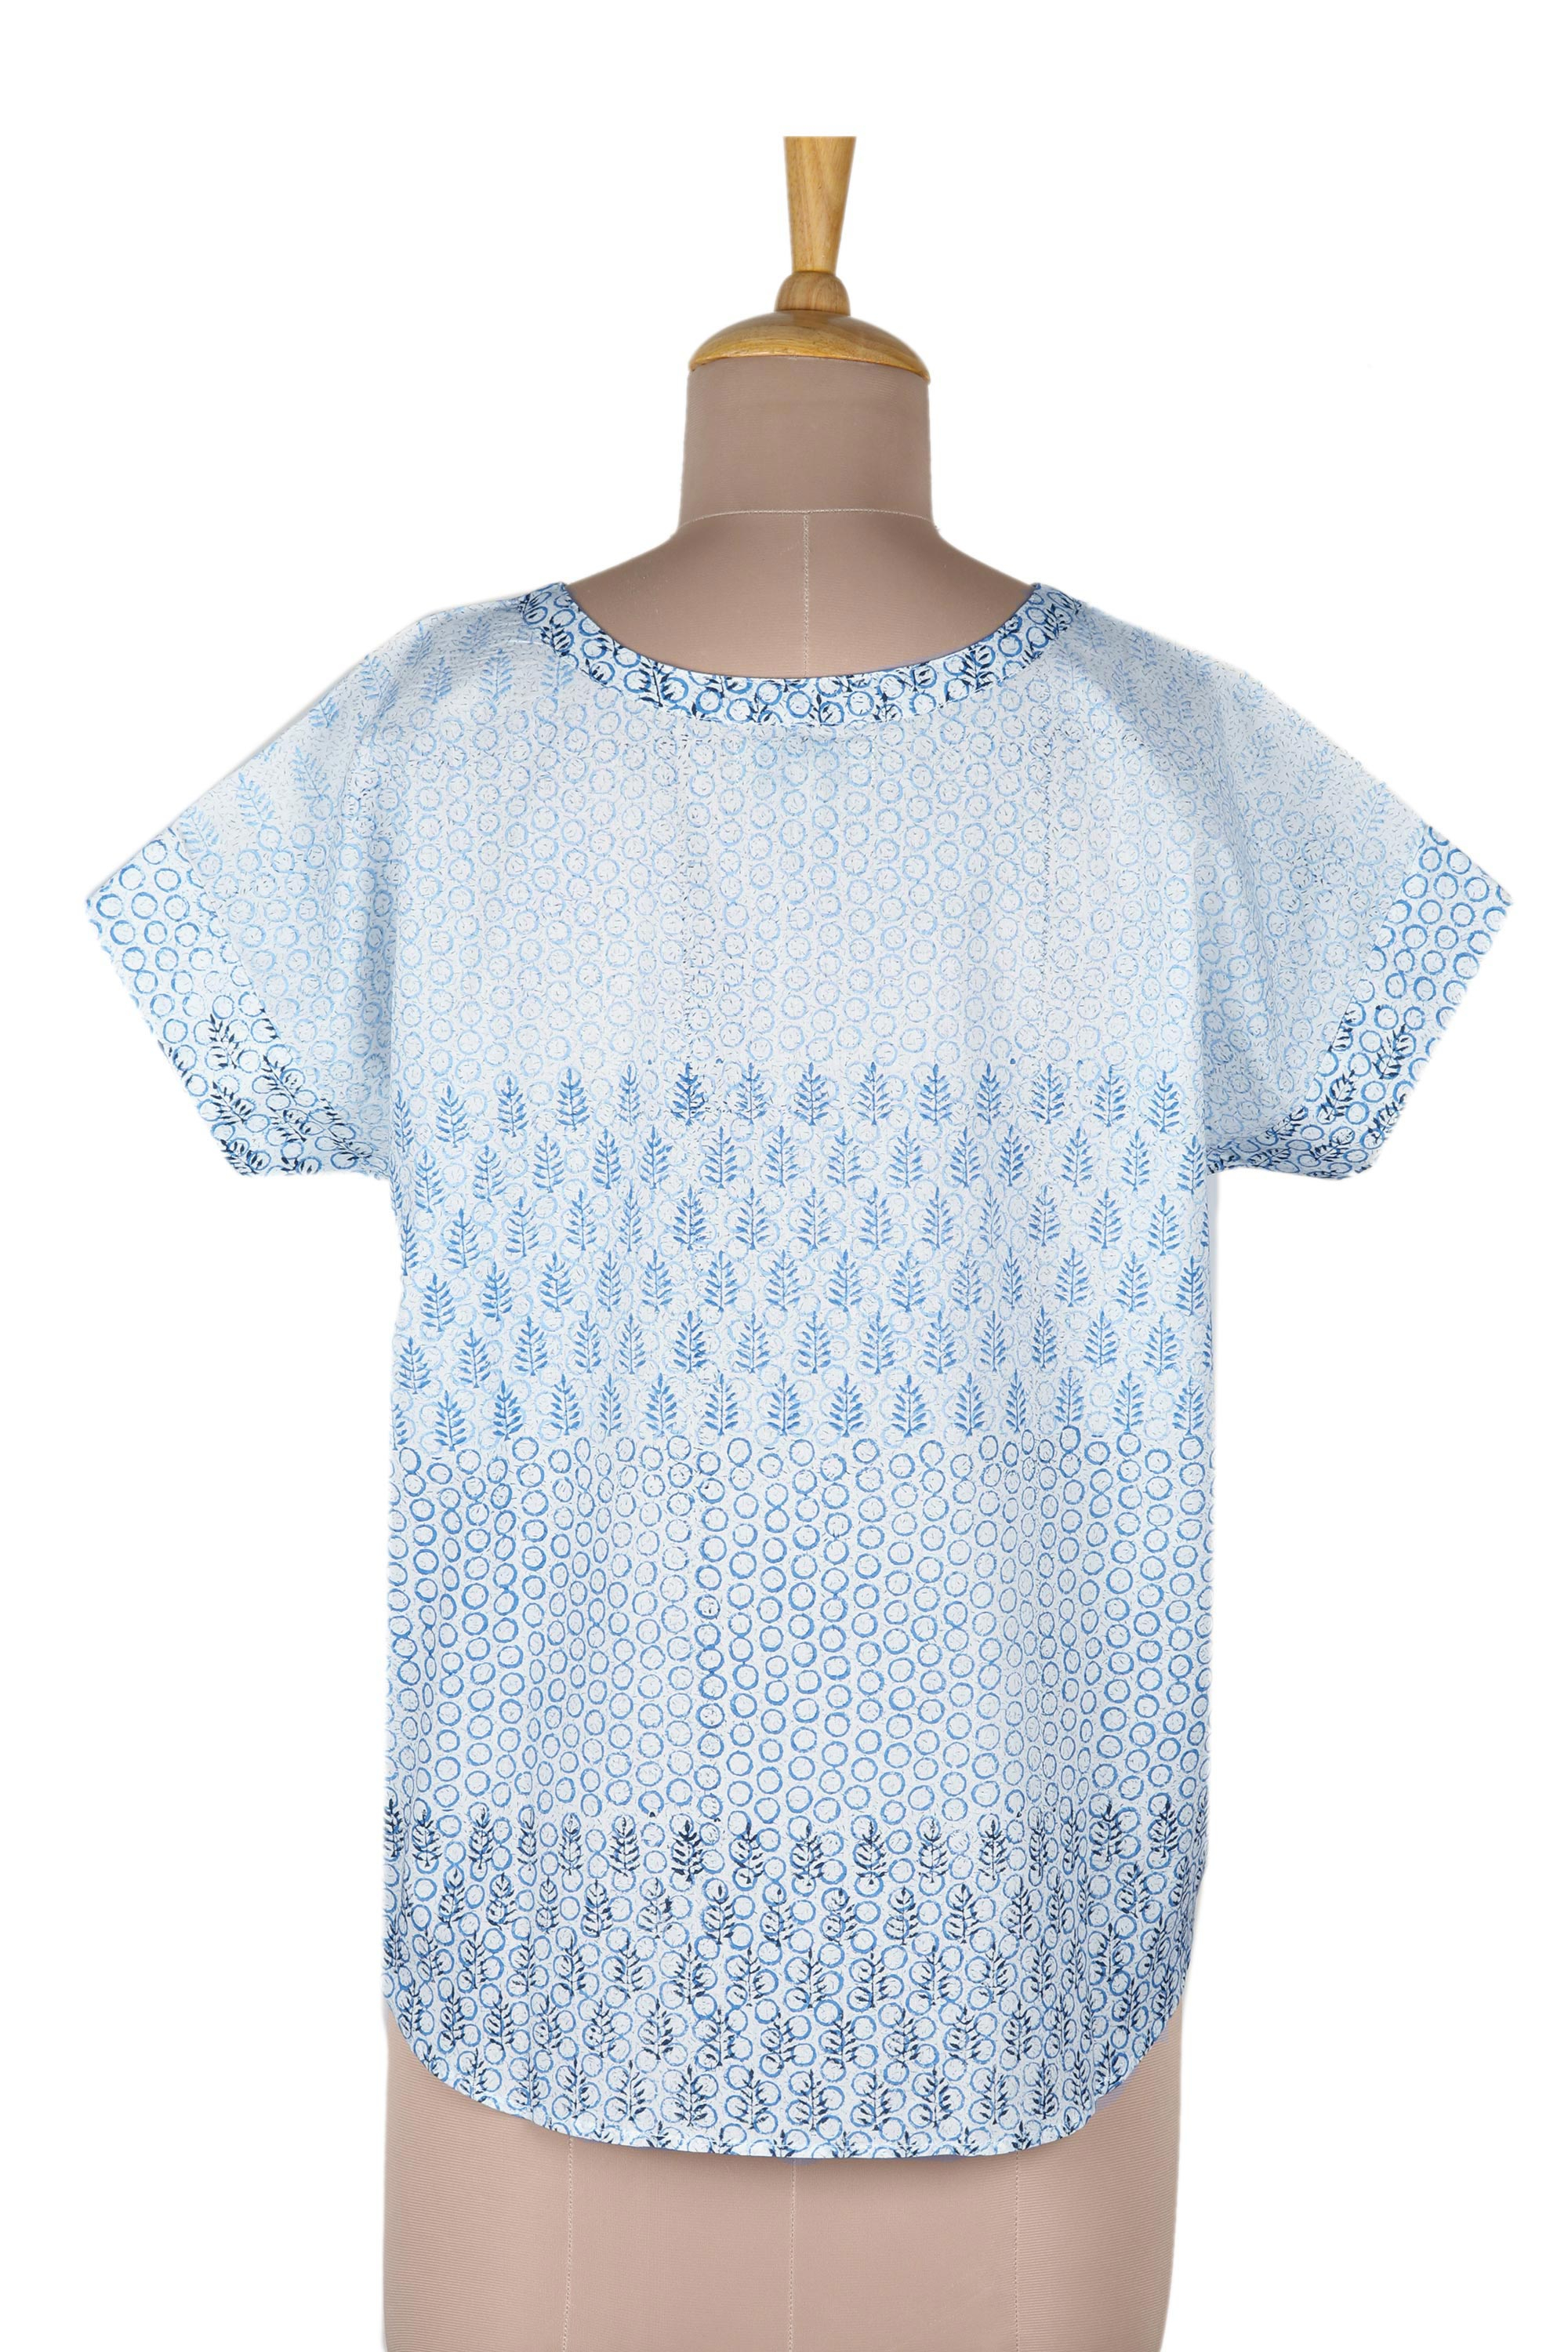 White Cotton Block Printed Top with Black and Blue Accents - Summer ...